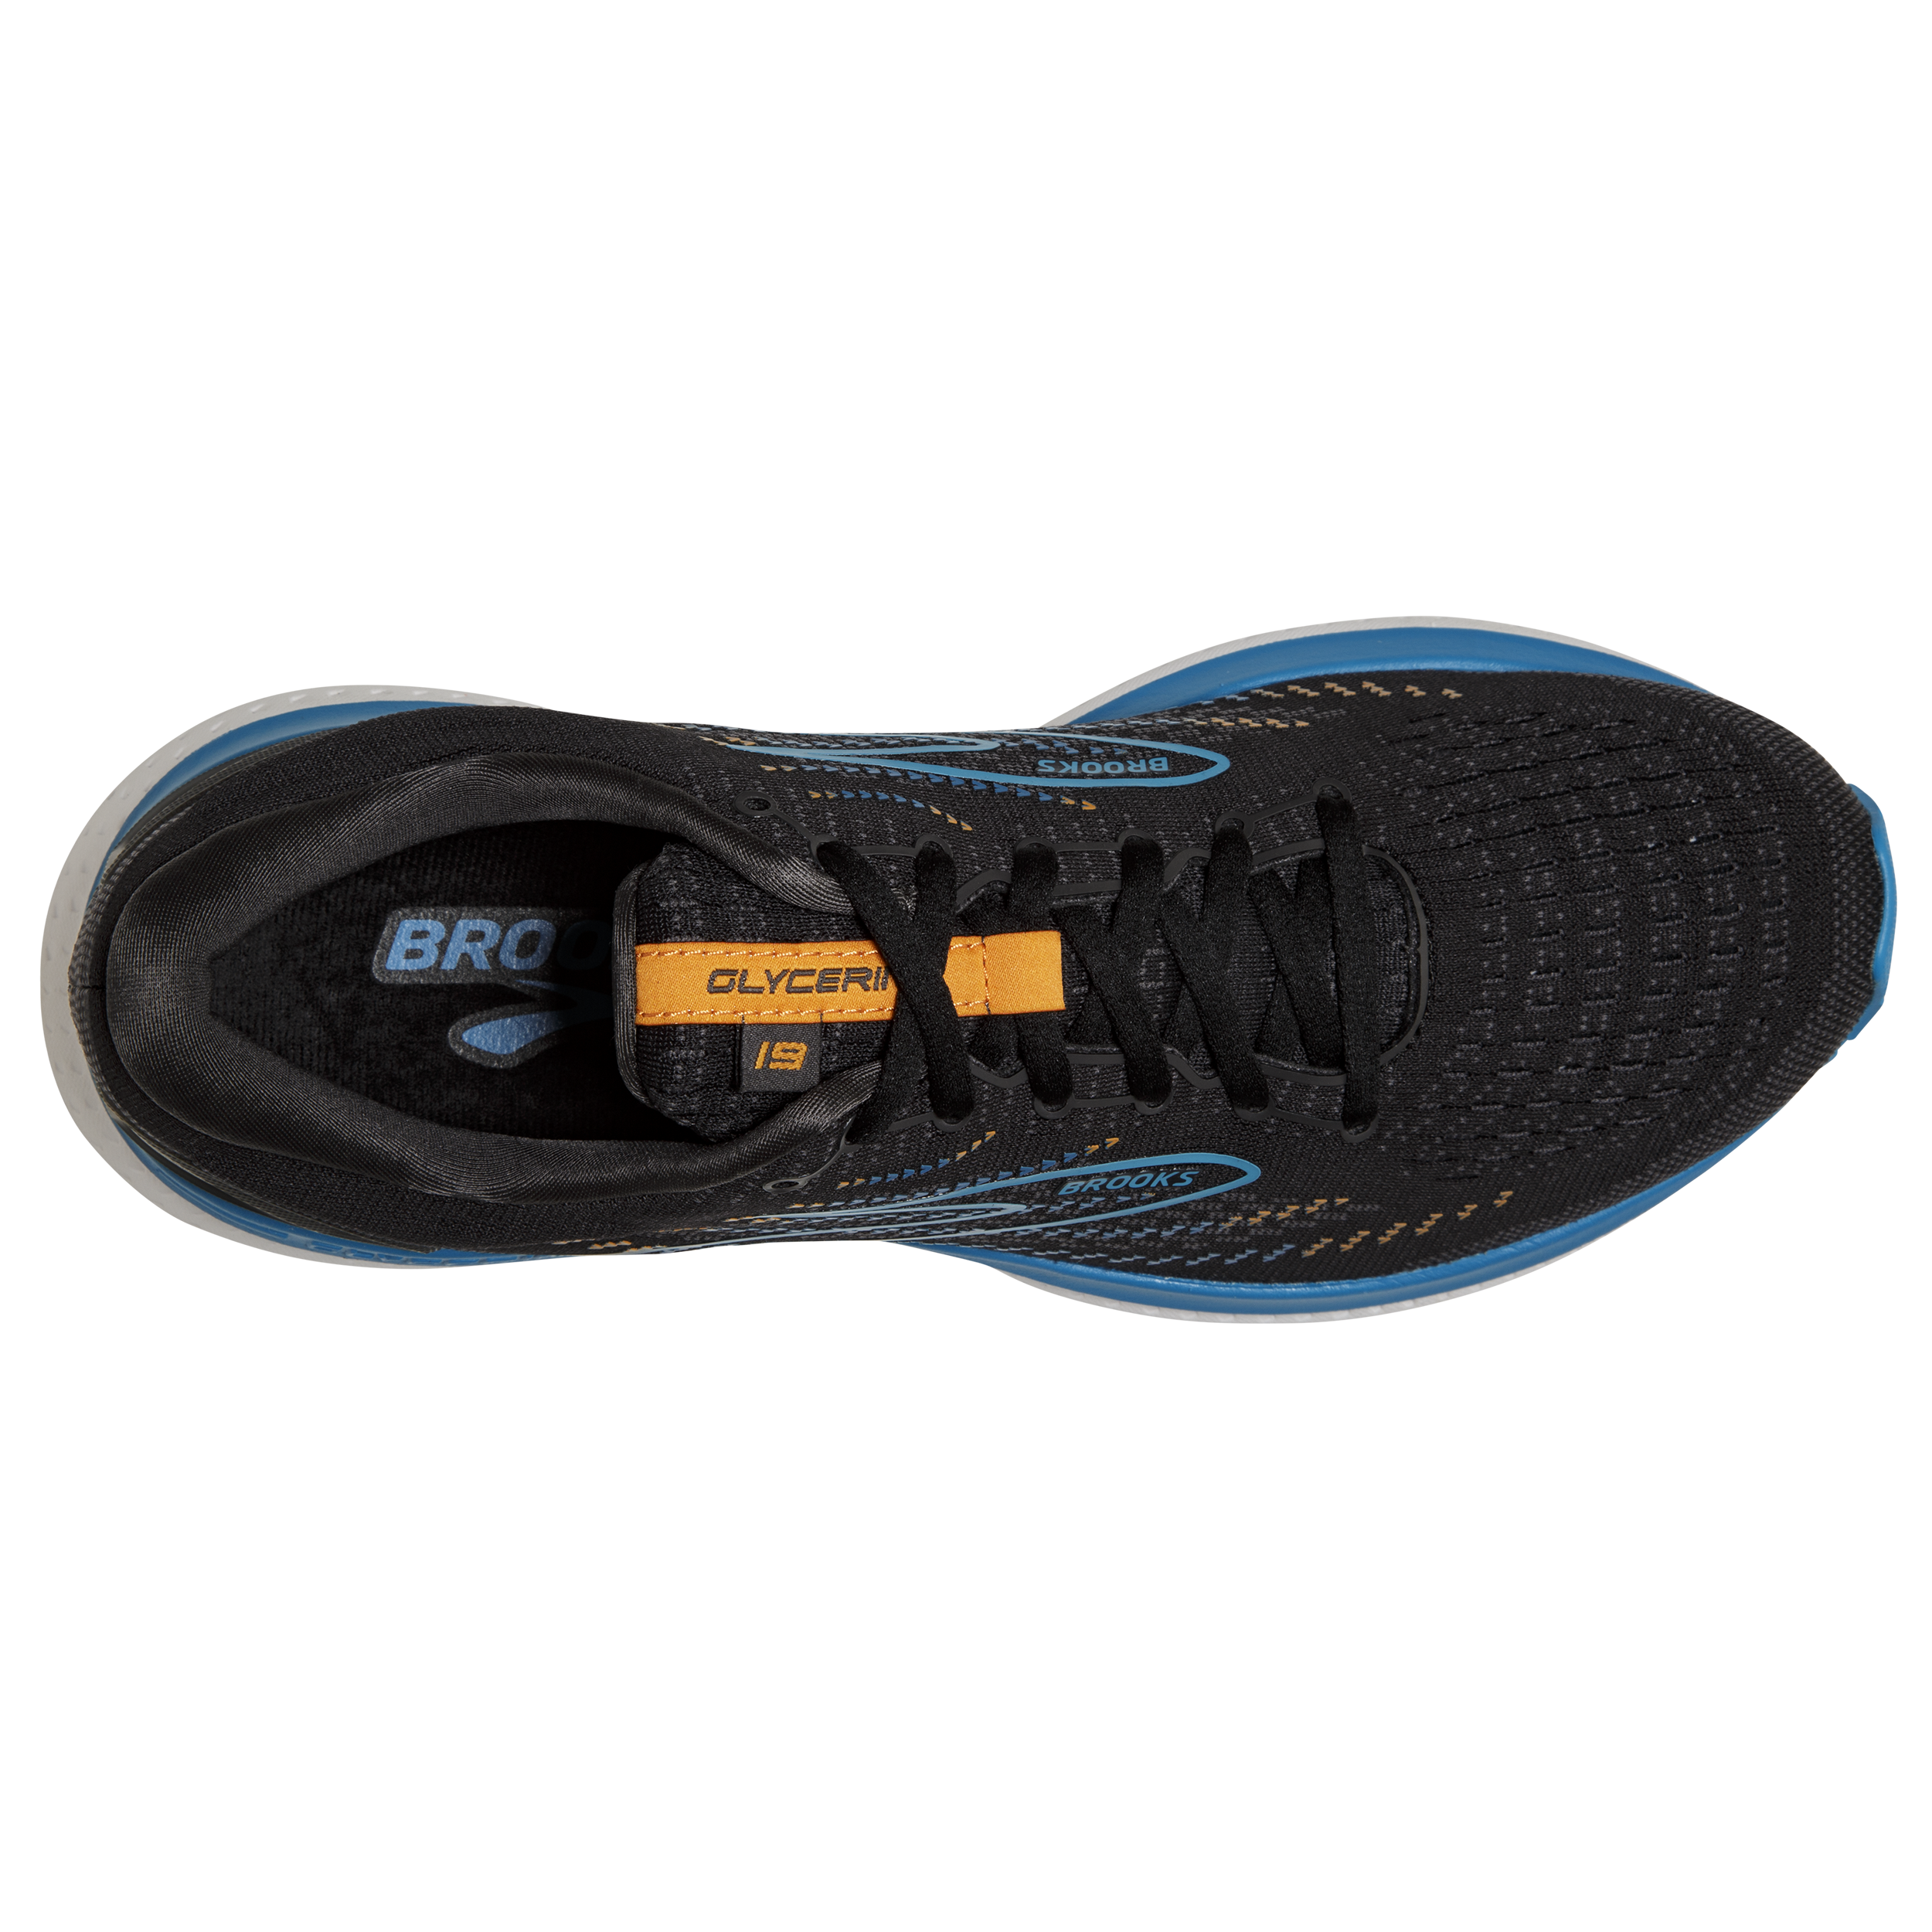 Karrimor Rapid Trainers Road Running Shoes Mens 